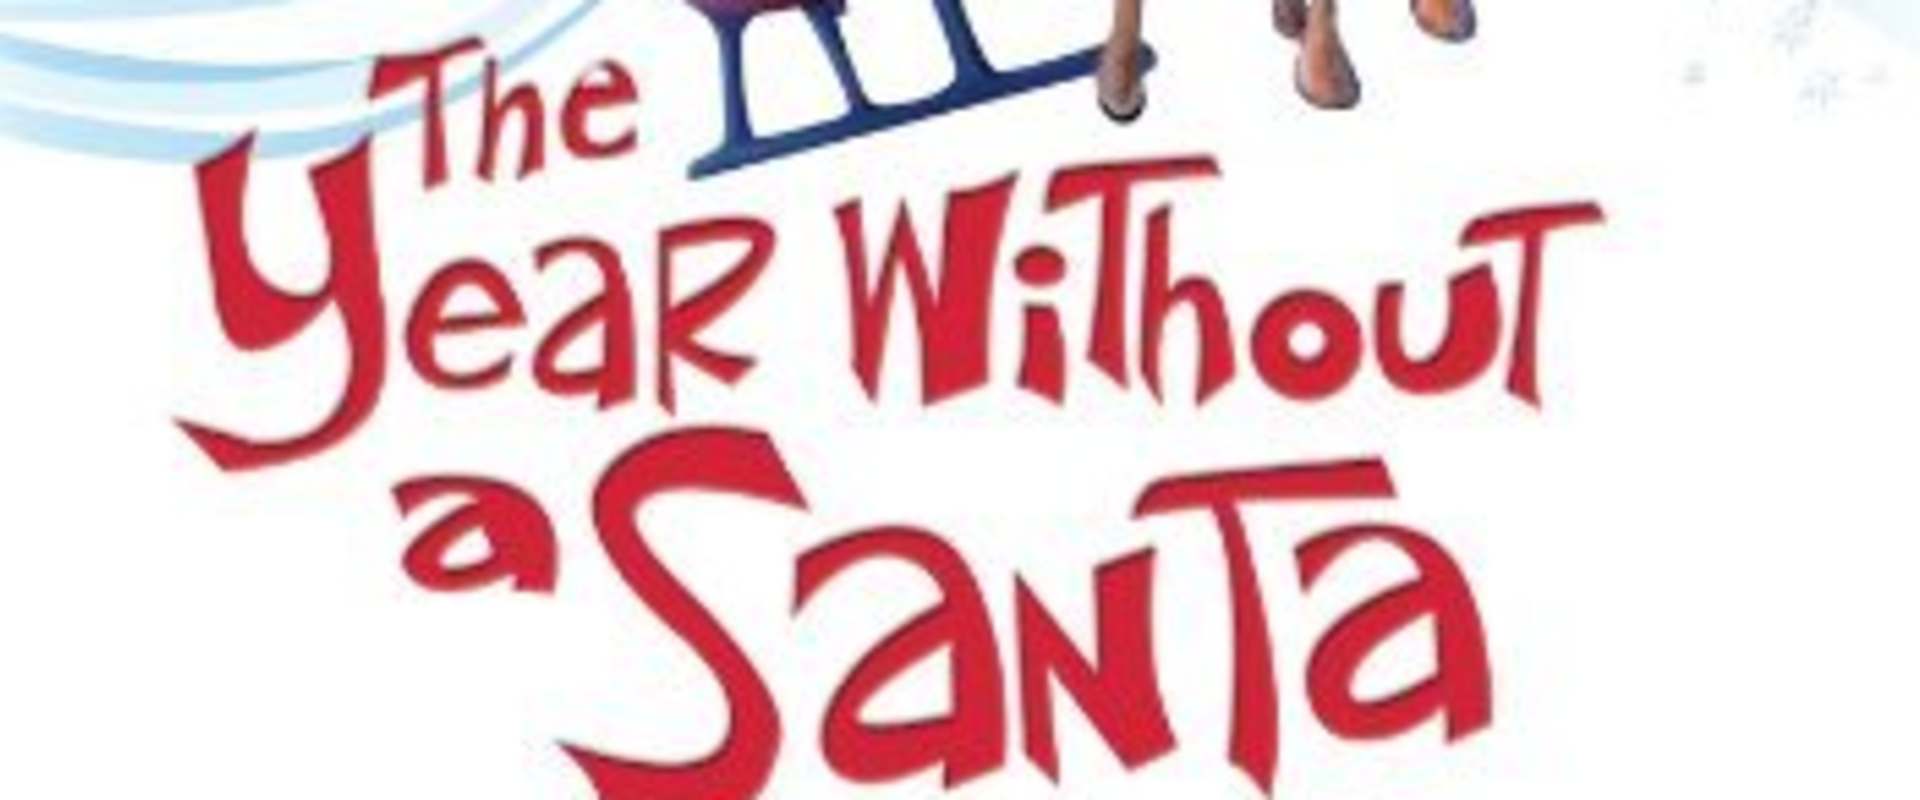 The Year Without a Santa Claus background 2